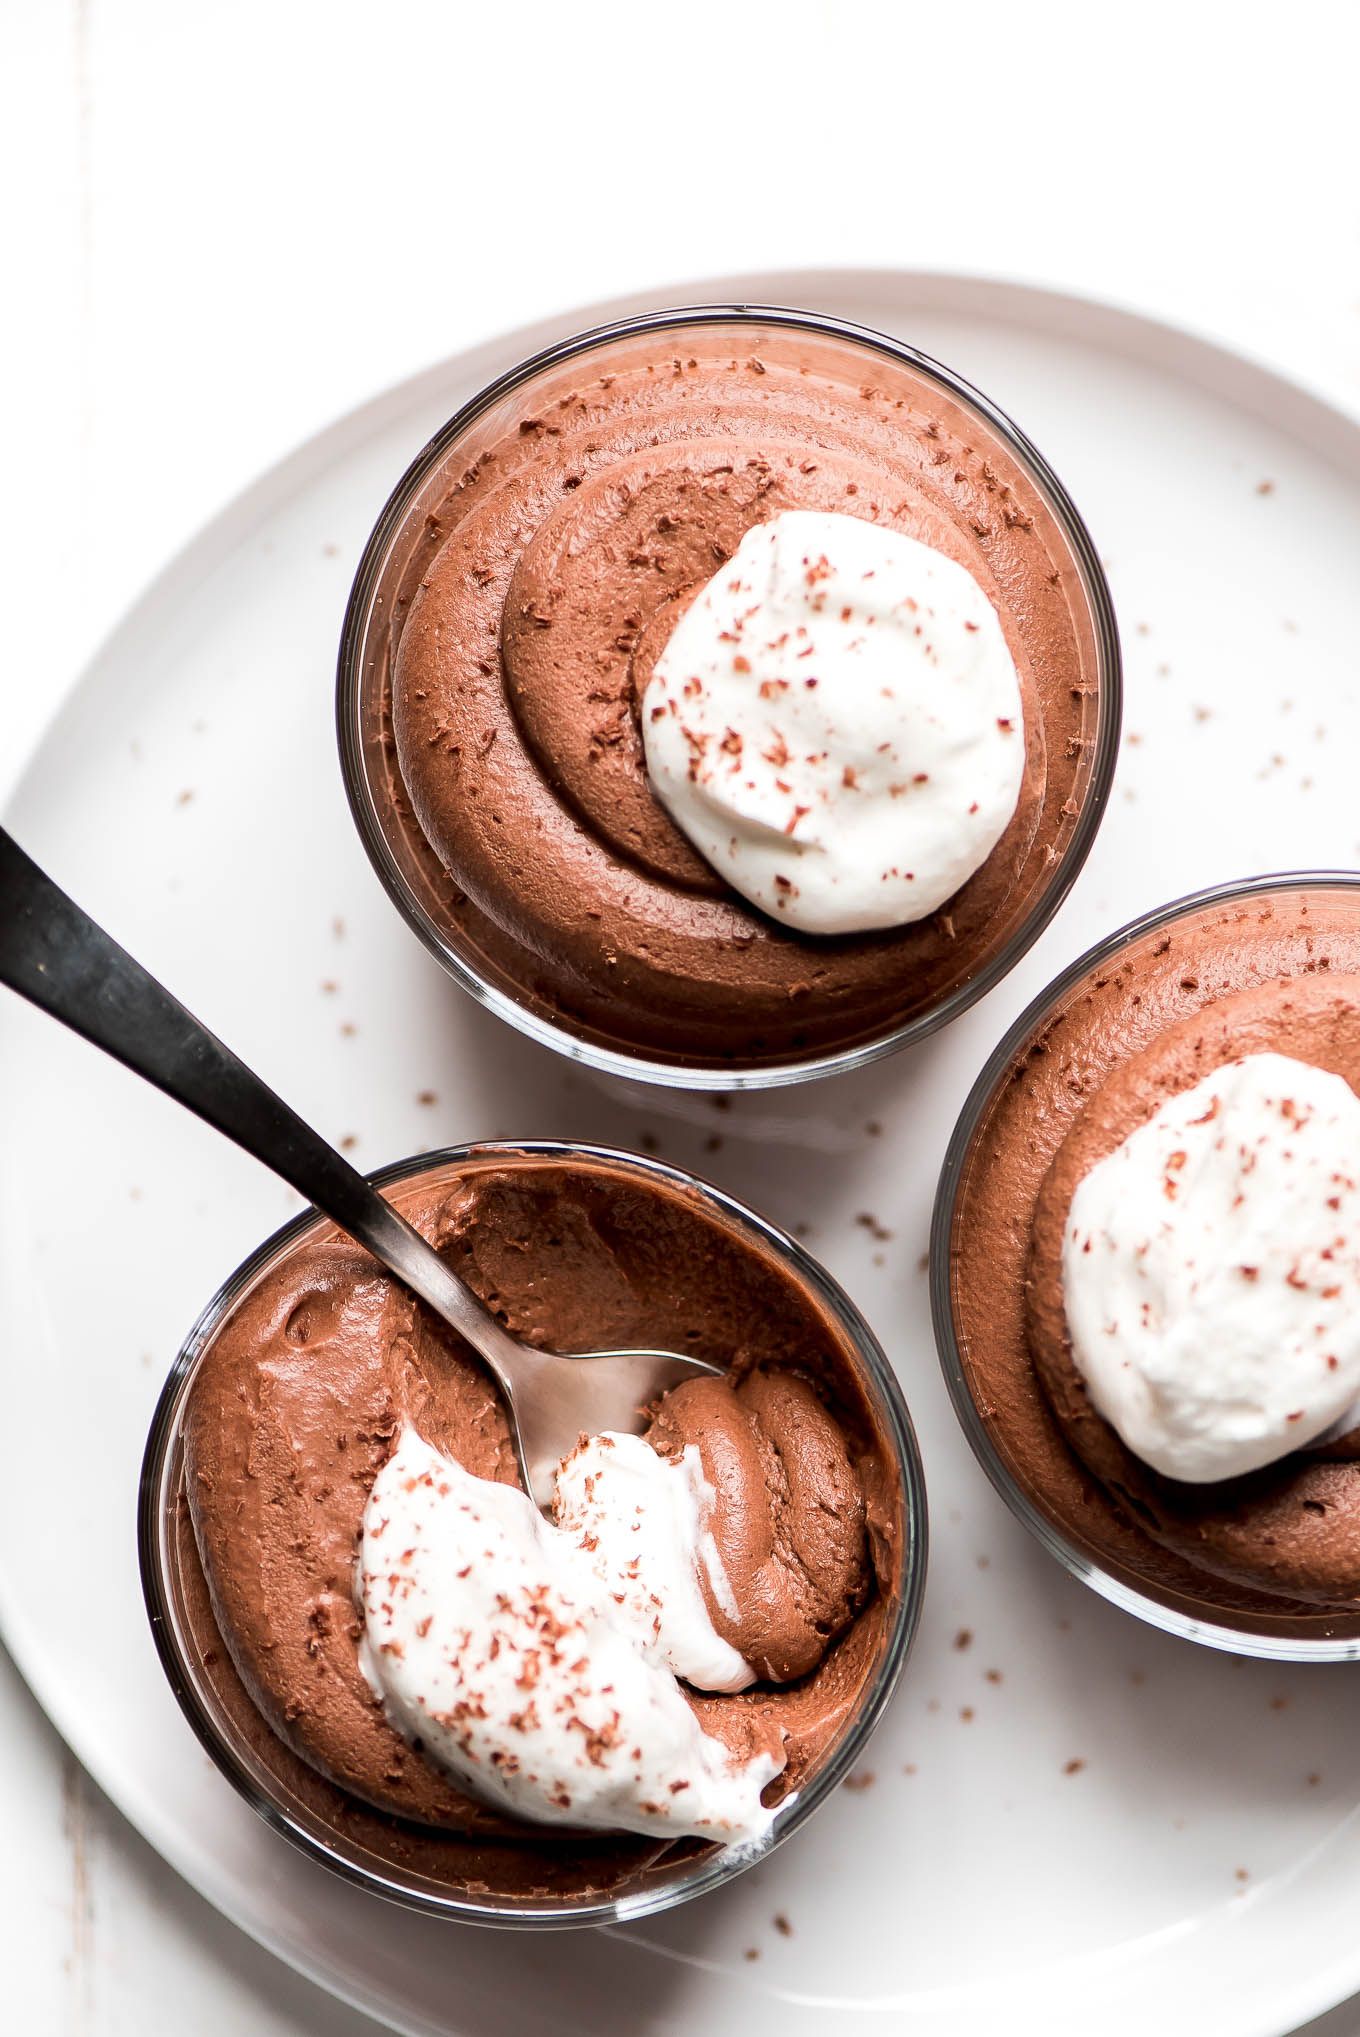 https://hips.hearstapps.com/hmg-prod.s3.amazonaws.com/images/stand-mixer-recipes-chocolate-mousse-1606837397.jpg